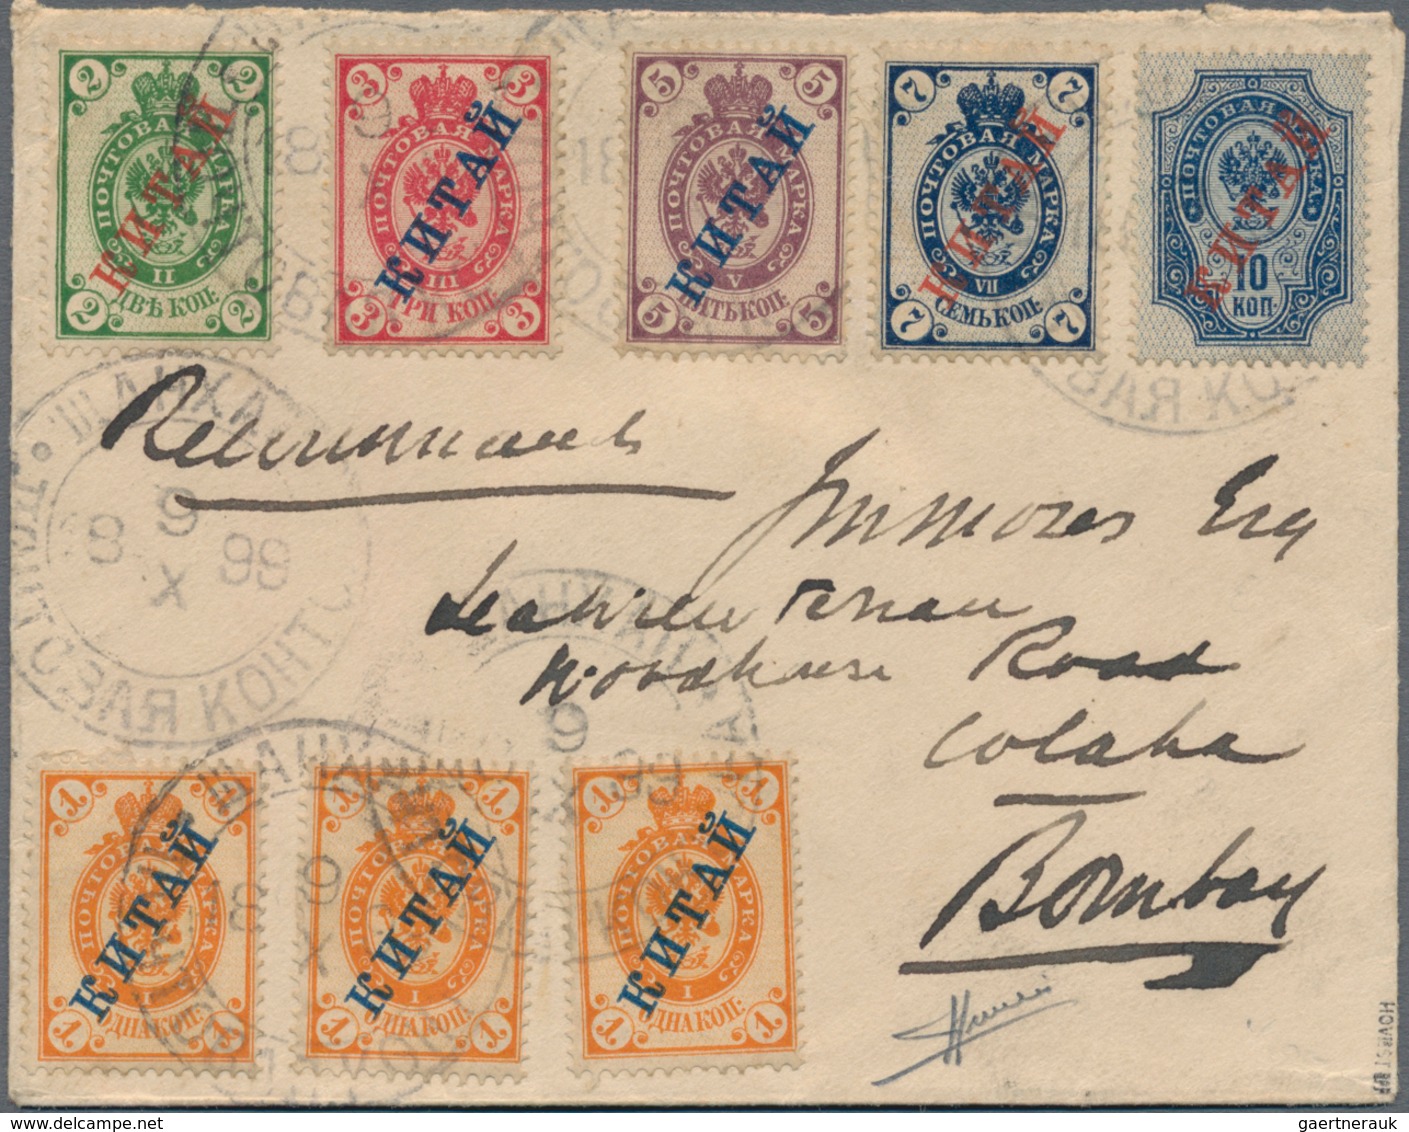 Russische Post In China: 1899, 1 K. (3), 2 K., 3 K., 5 K., 7 K. And 10 K. Total 30 K. Tied "XANHAI 9 - China